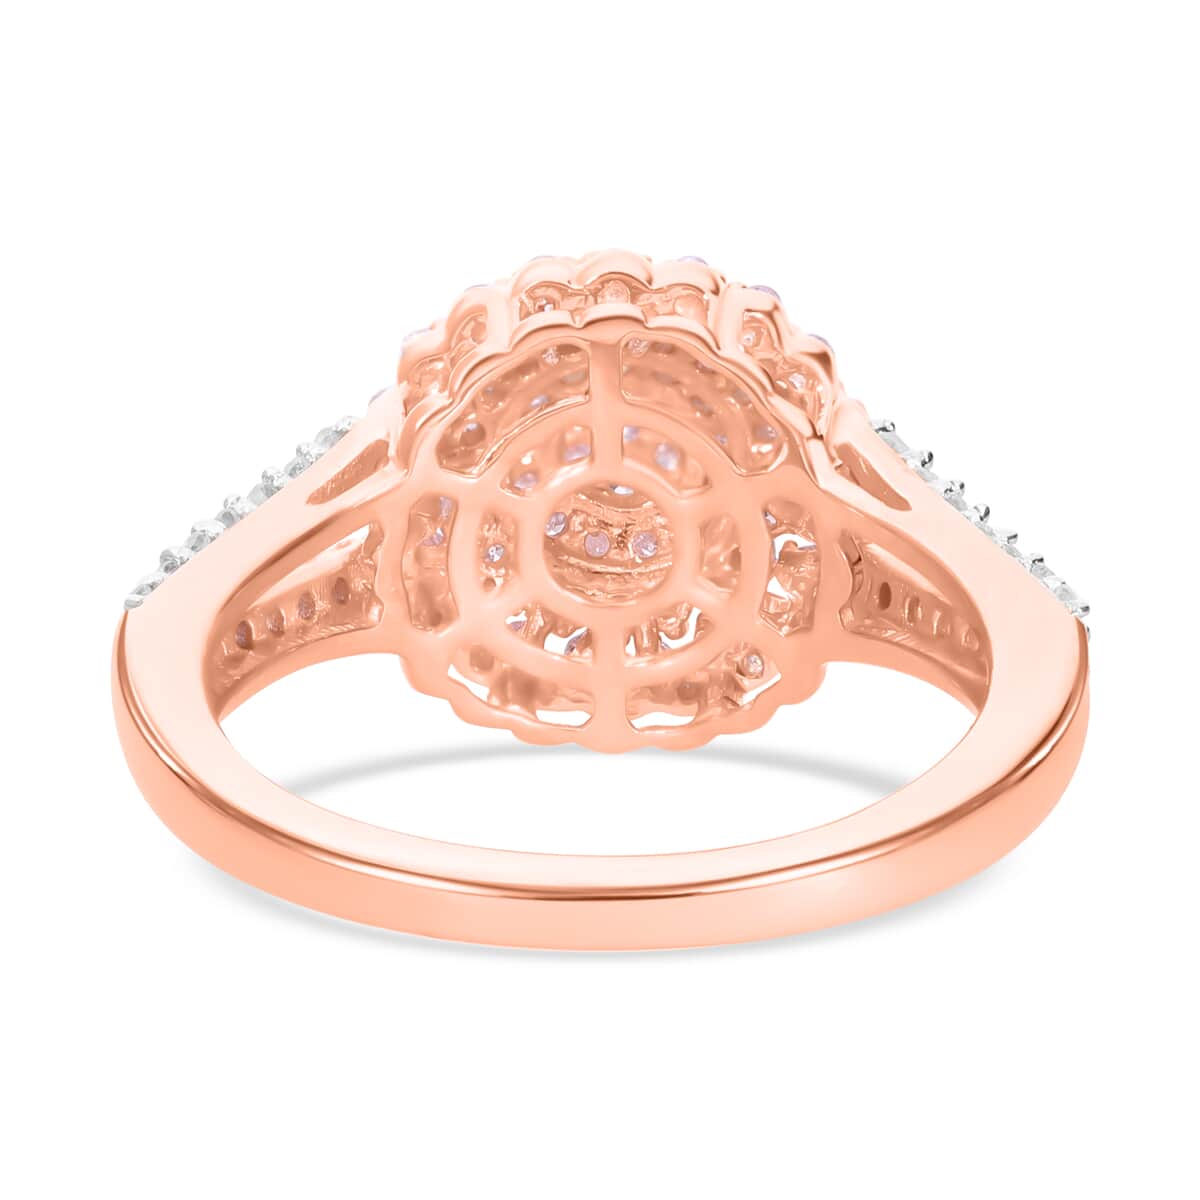 Buy Natural Pink and White Diamond I3 Floral Ring in Vermeil Rose